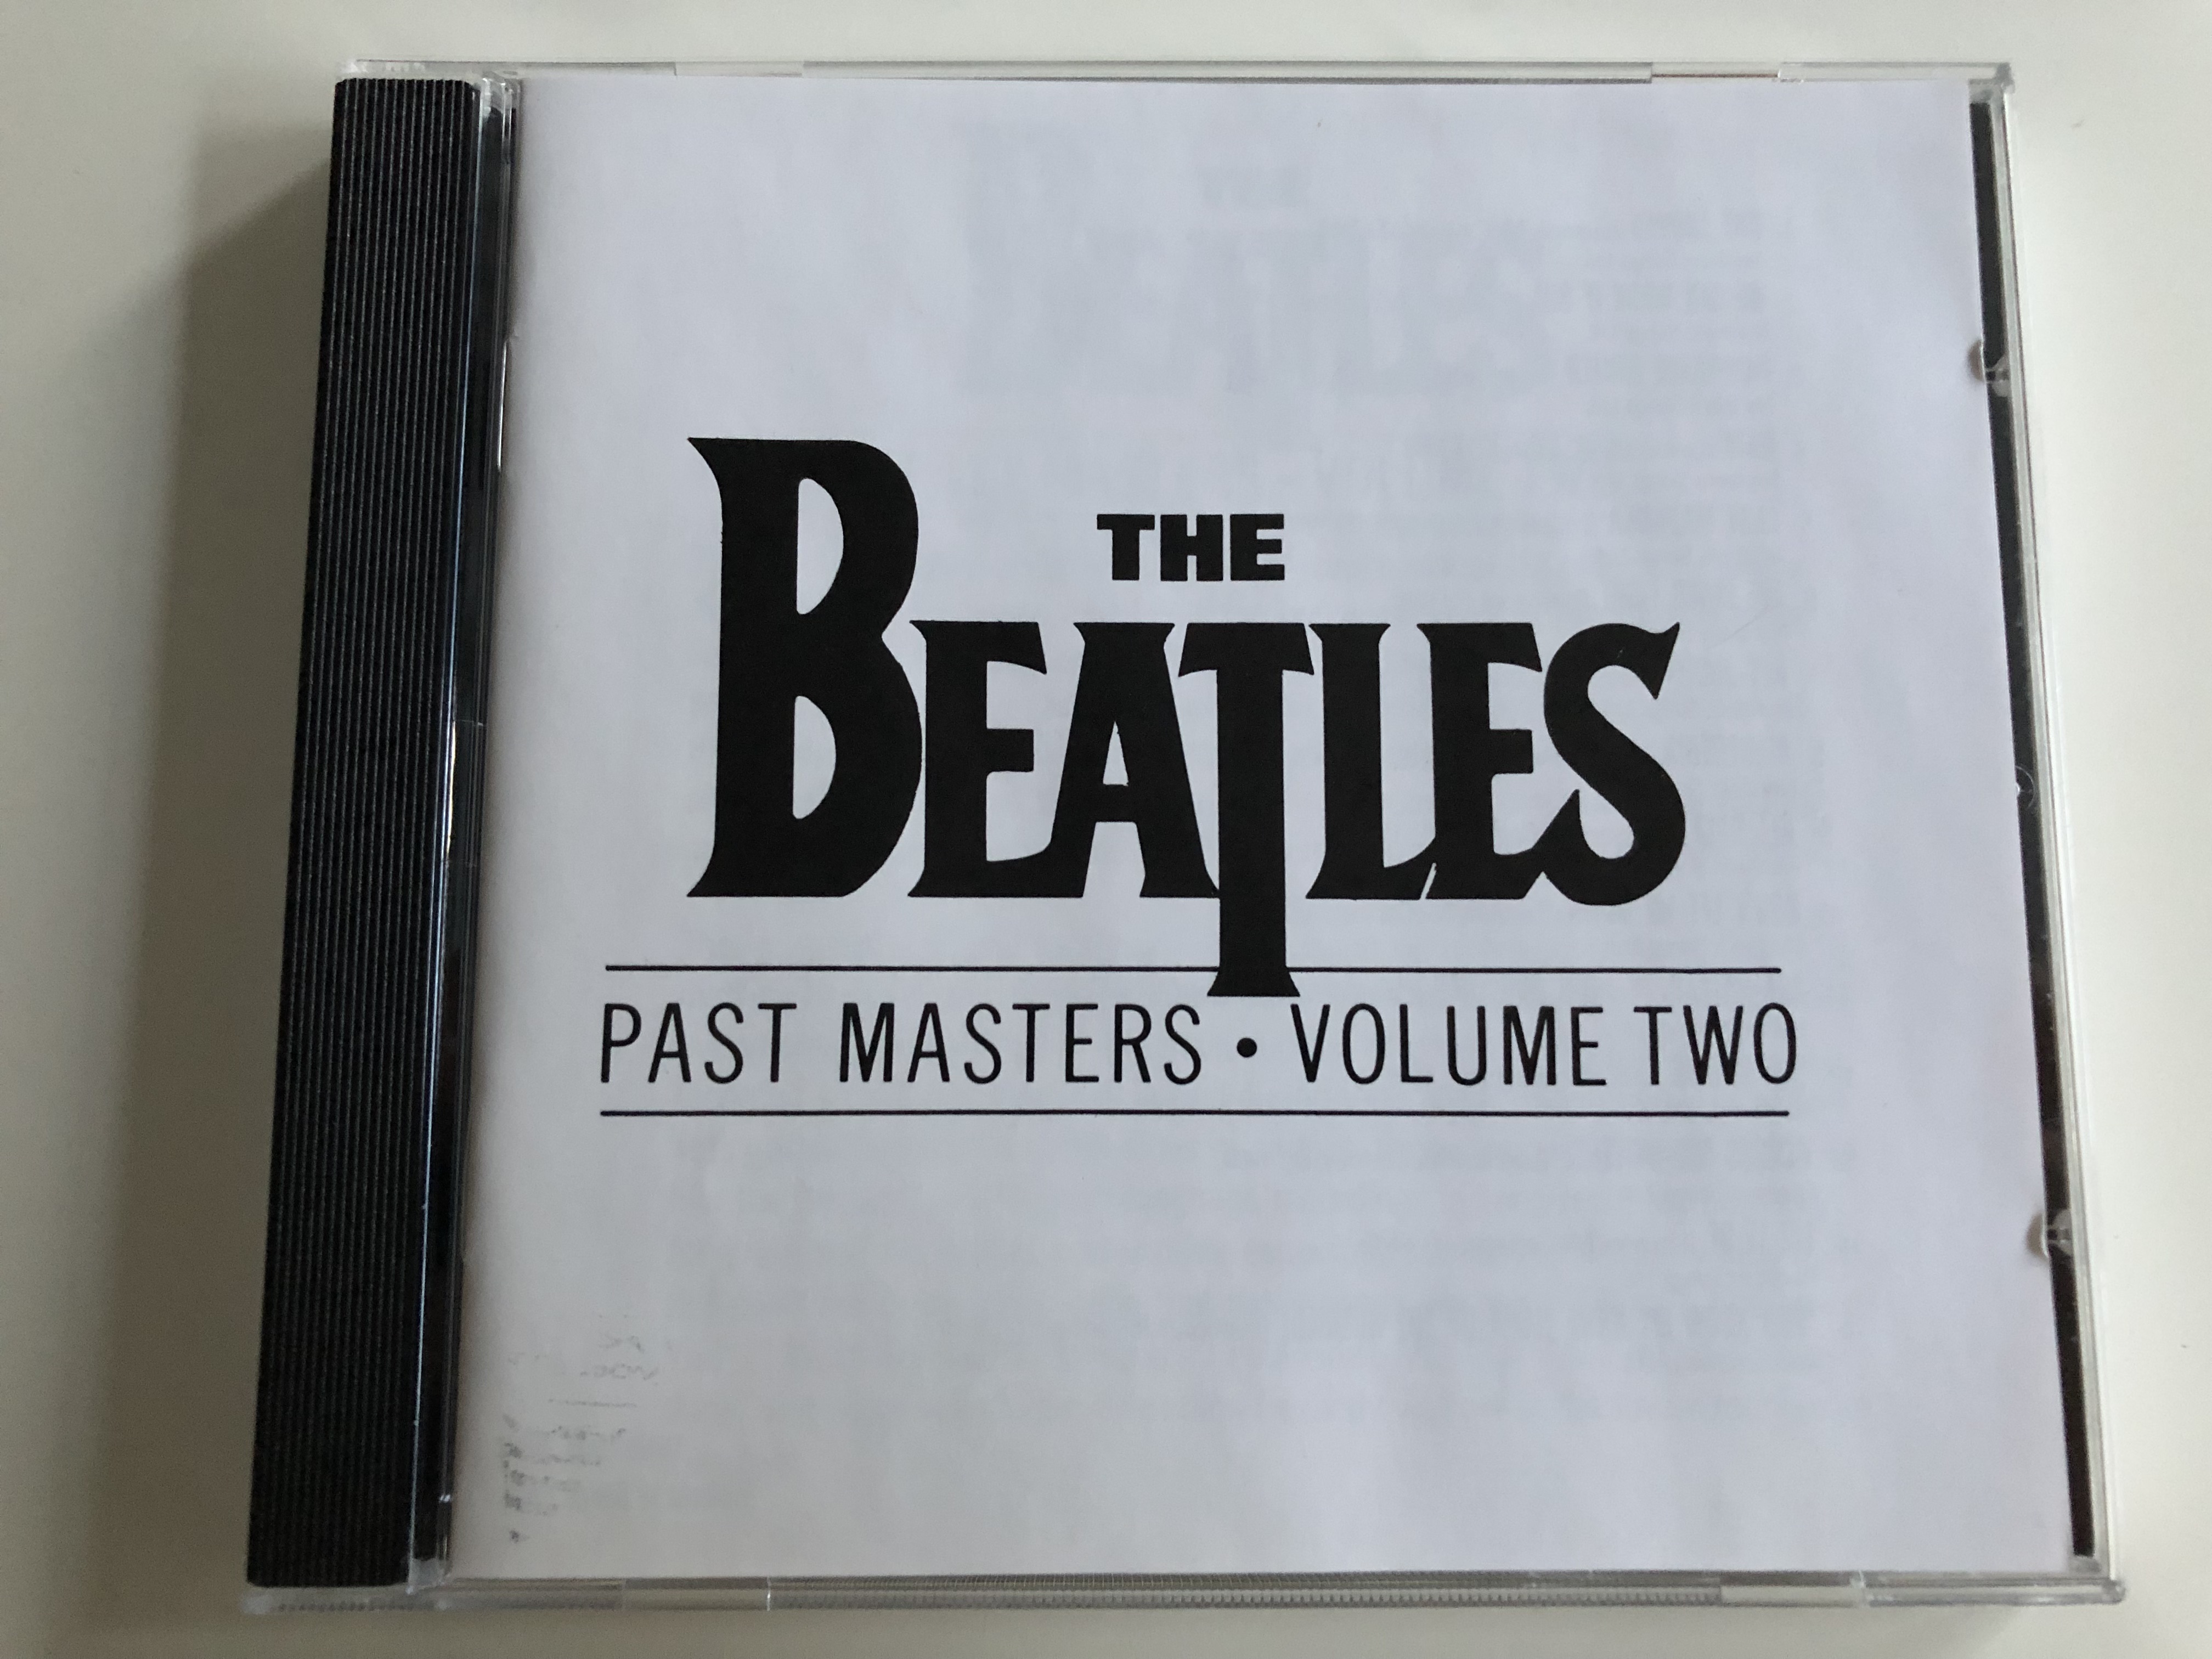 the-beatles-past-masters-volume-two-audio-cd-1988-emi-records-cdp-7900442-pm-518-1-.jpg